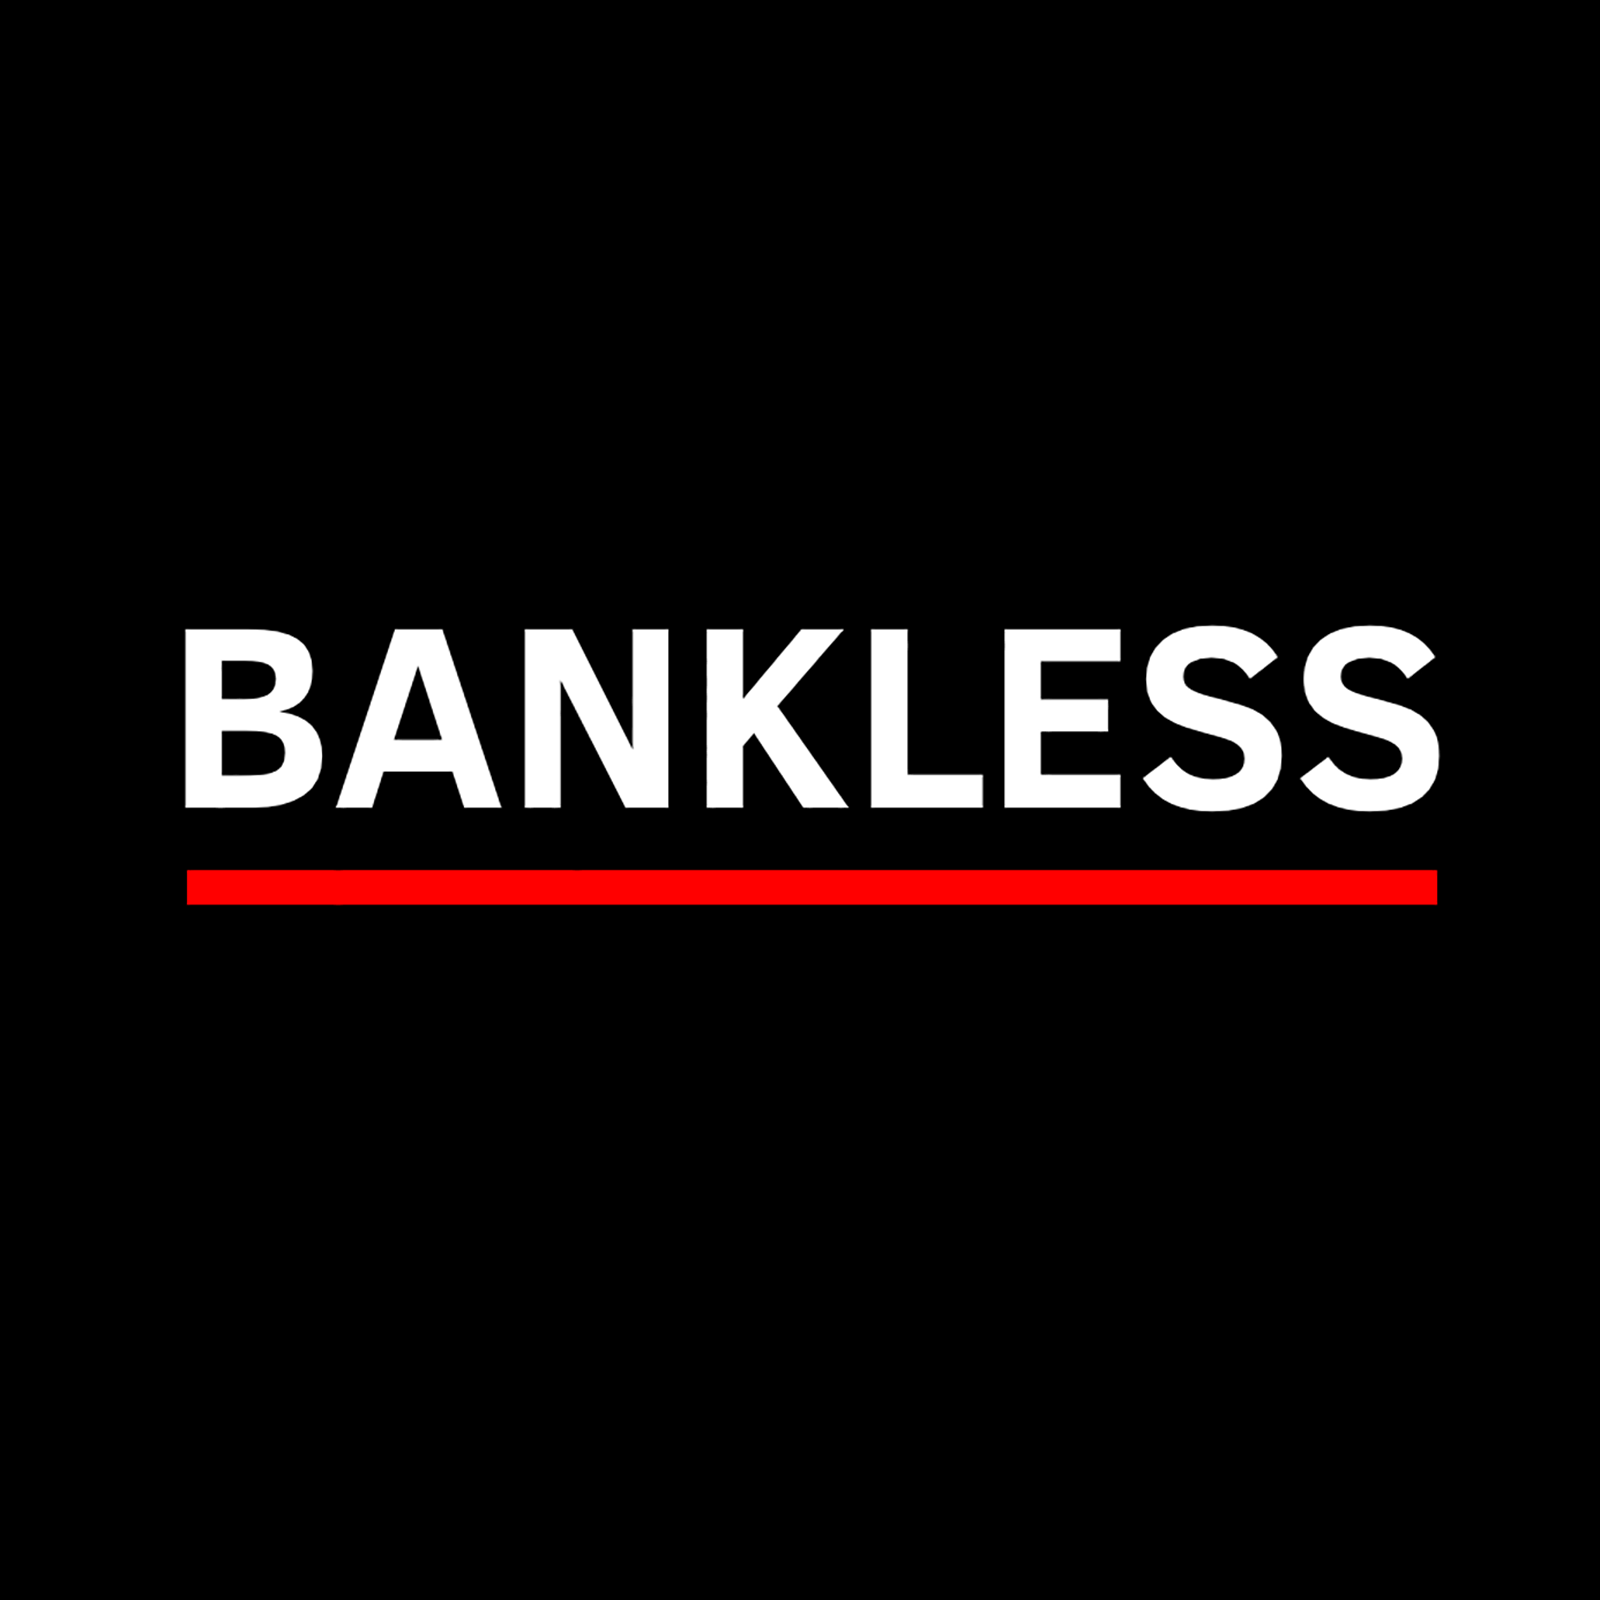 Fresh update on "building" discussed on Bankless